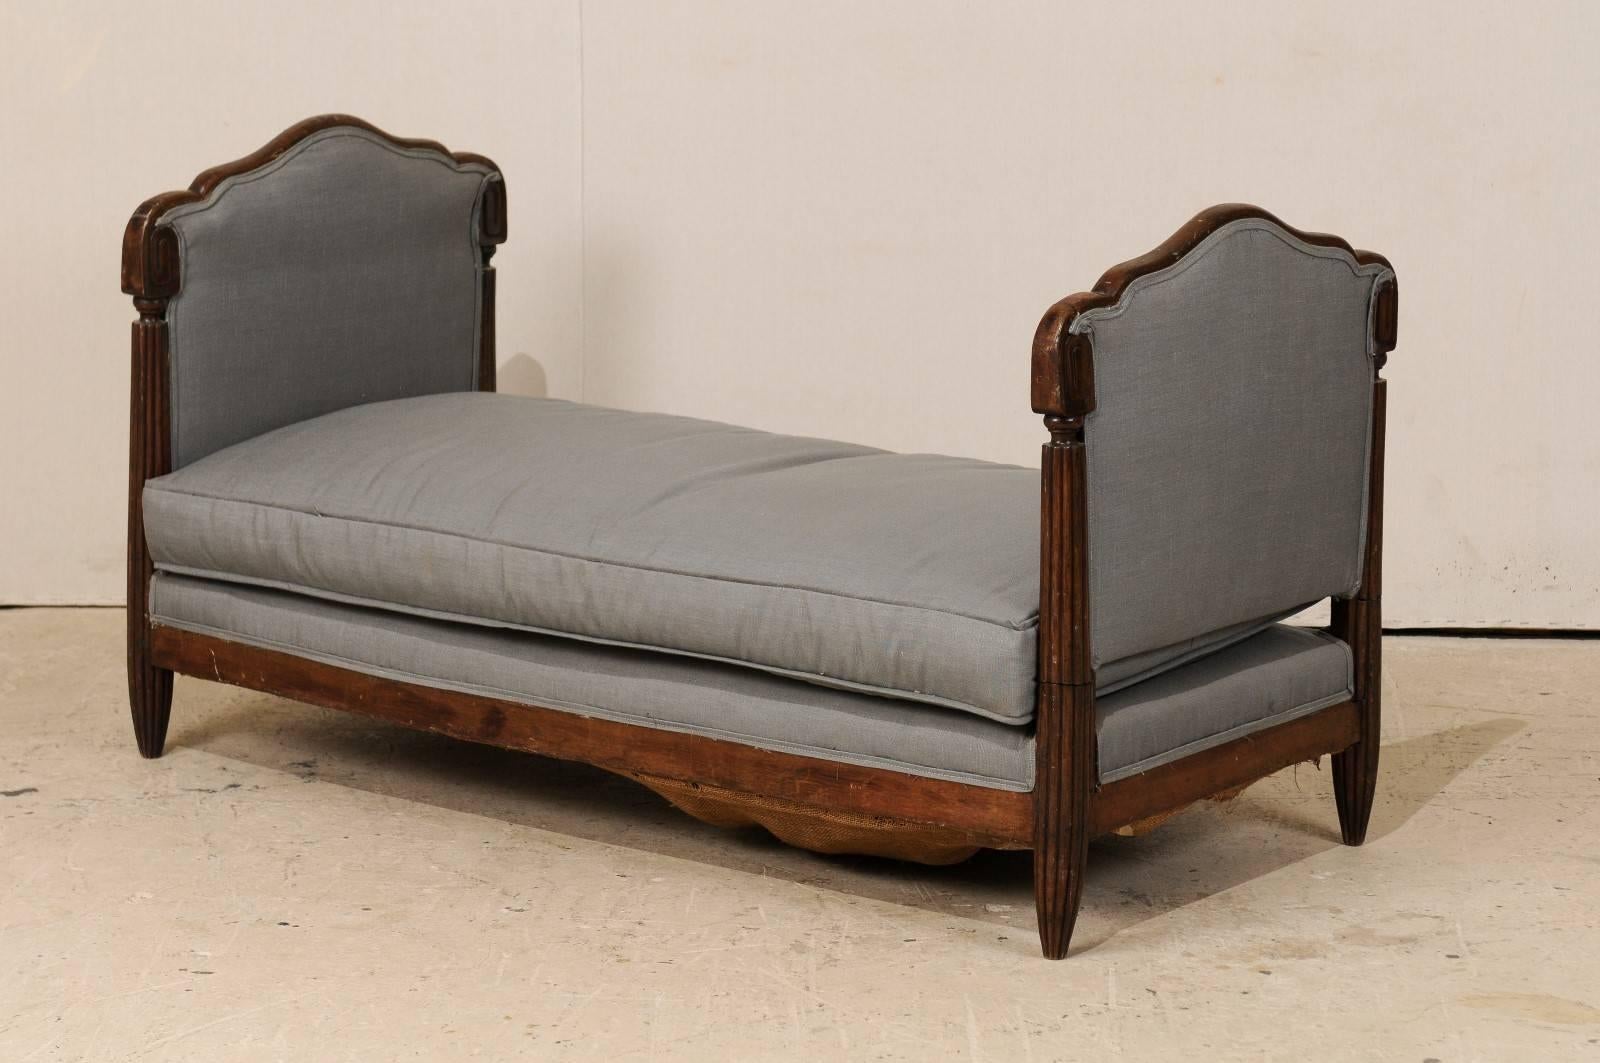 A French Deco style Lit de Jour (daybed). This French daybed, from the early 20th century, features a carved walnut frame with reeded legs. There is a drop arm which provides more extension for more versatility. This French Lit de Jour would be